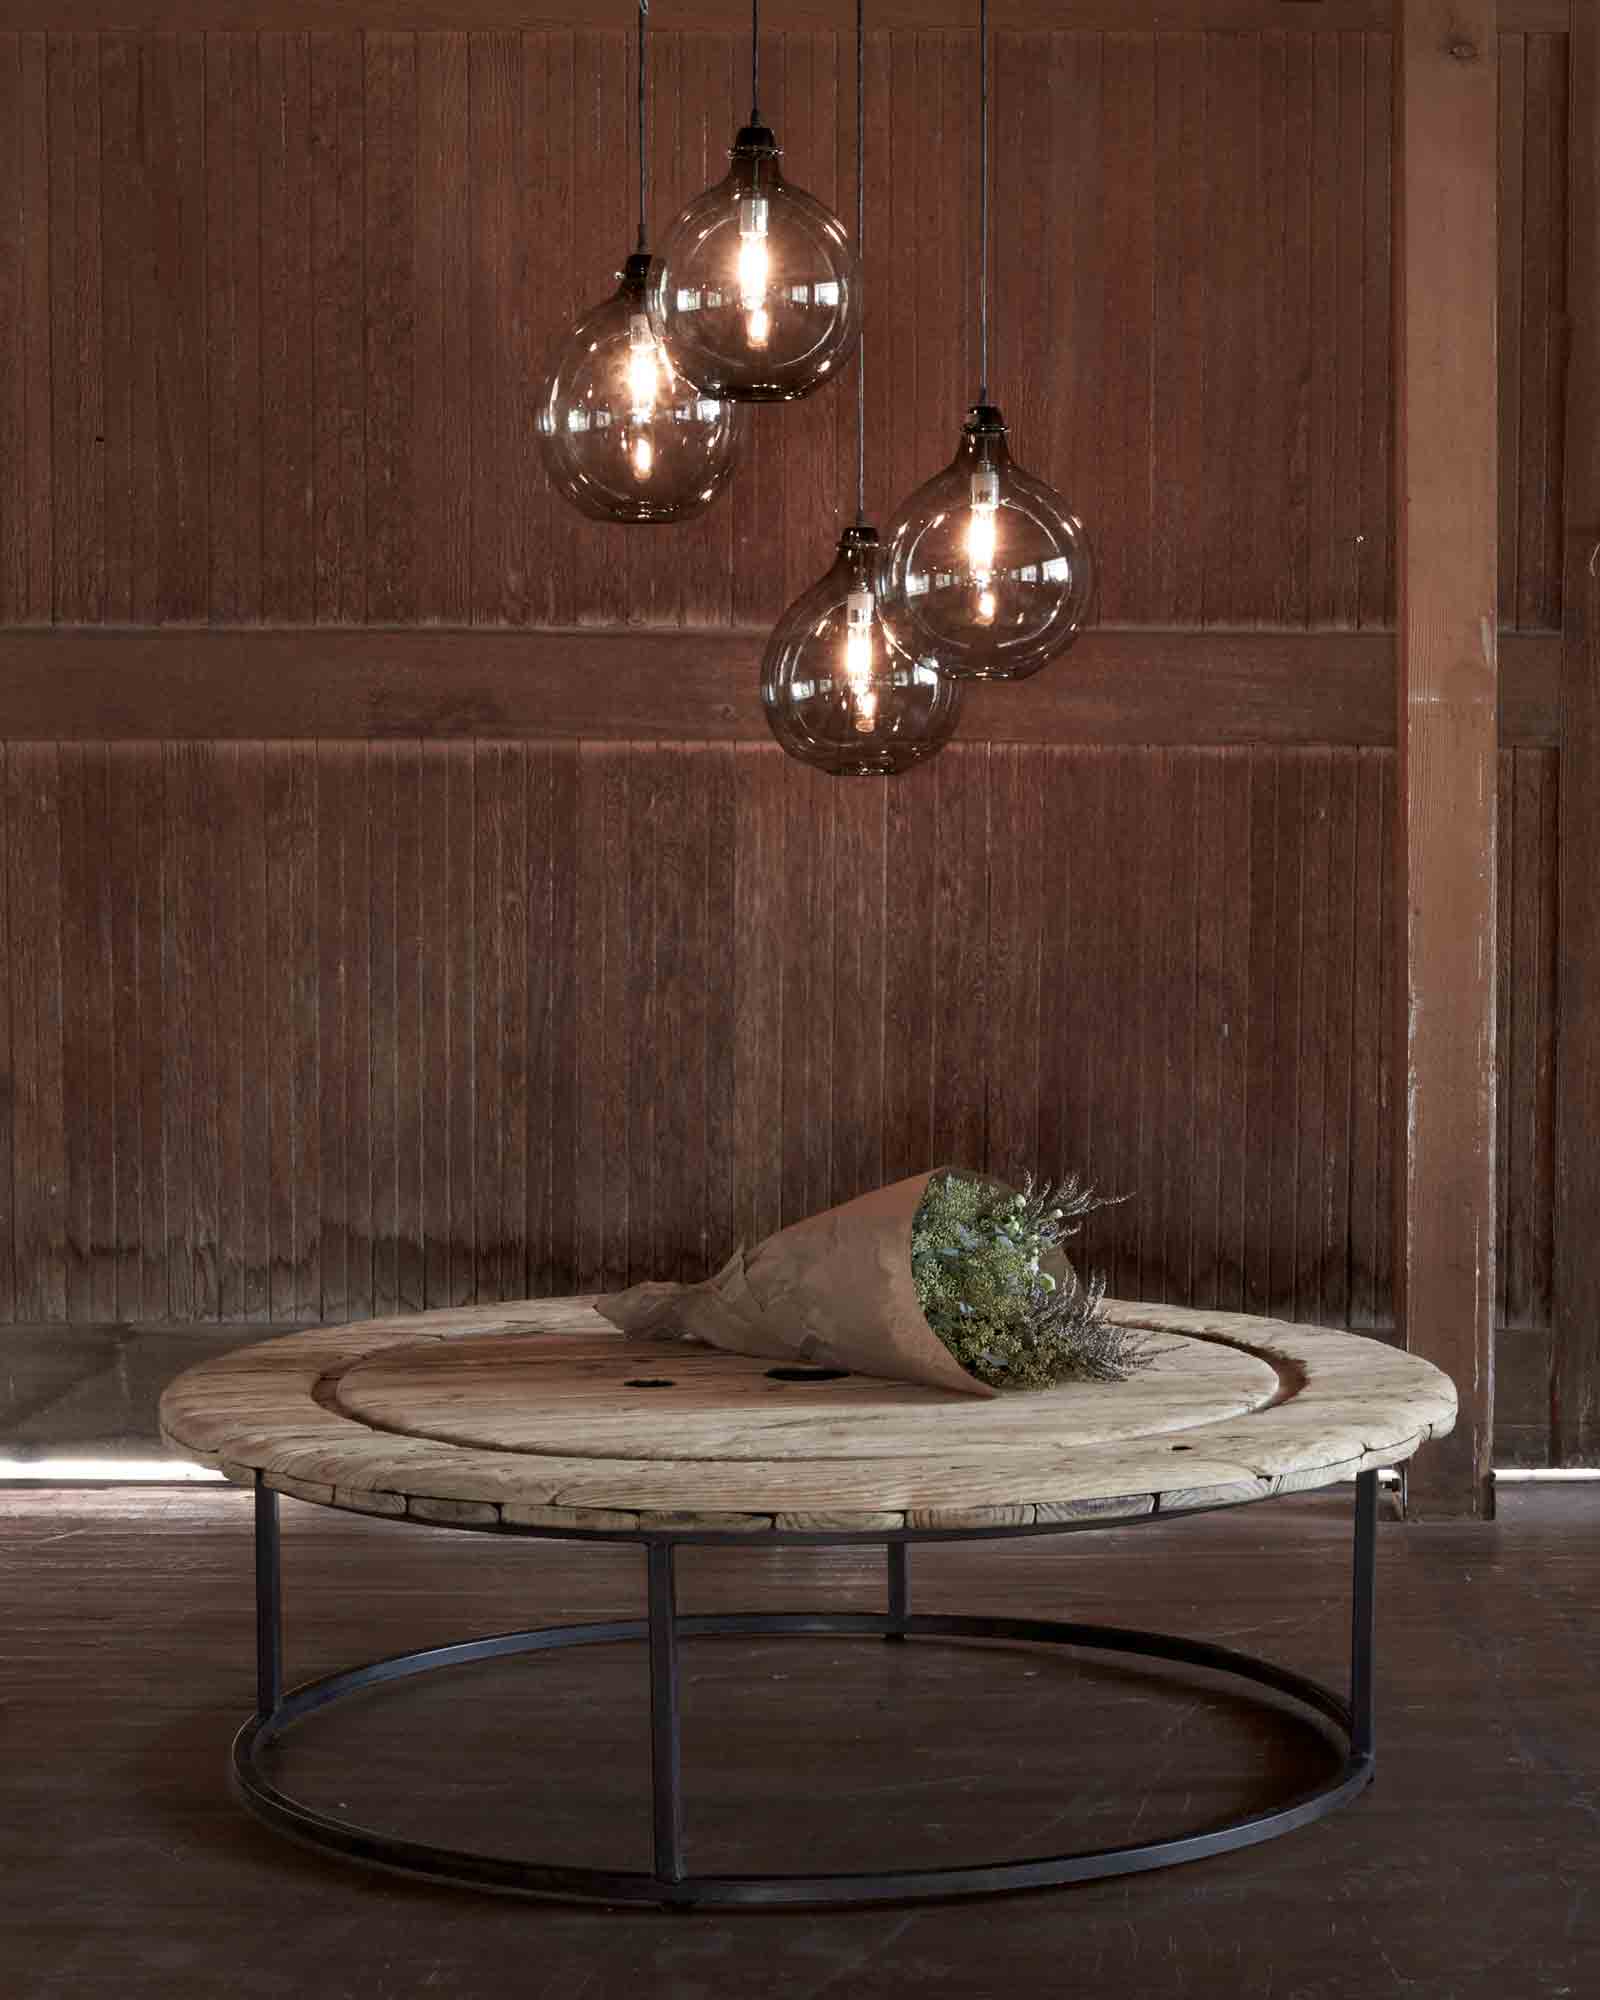  Wood round coffee table with four Jug Lamps size large in smoke finish hanging above coffee table. Wood wall in the background and bouquet of flowers on the coffee table.  